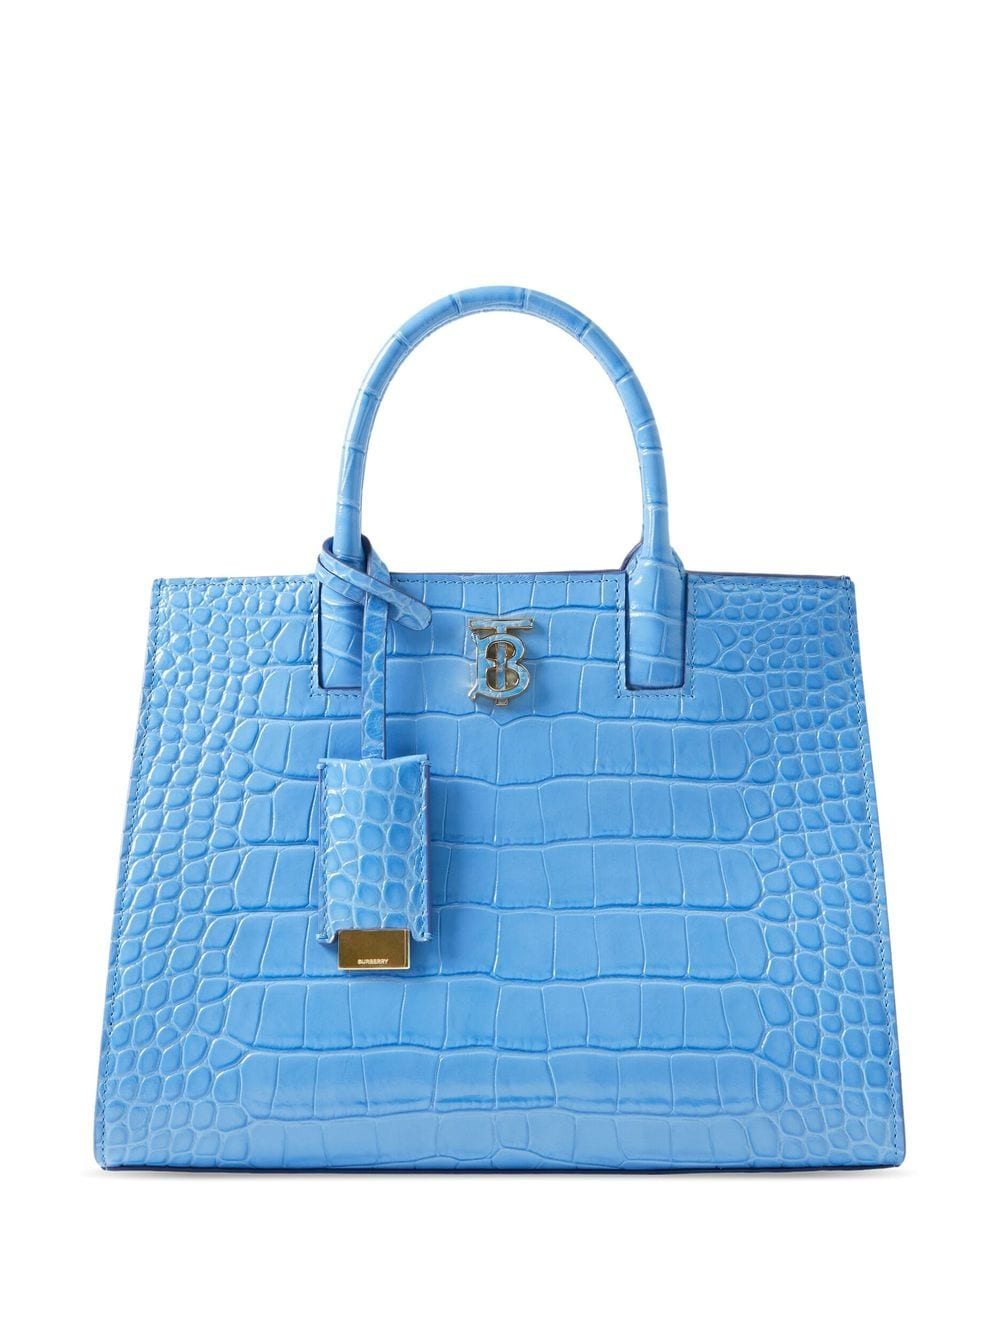 Burberry Frances Mini Embossed Tote Bag In Blue